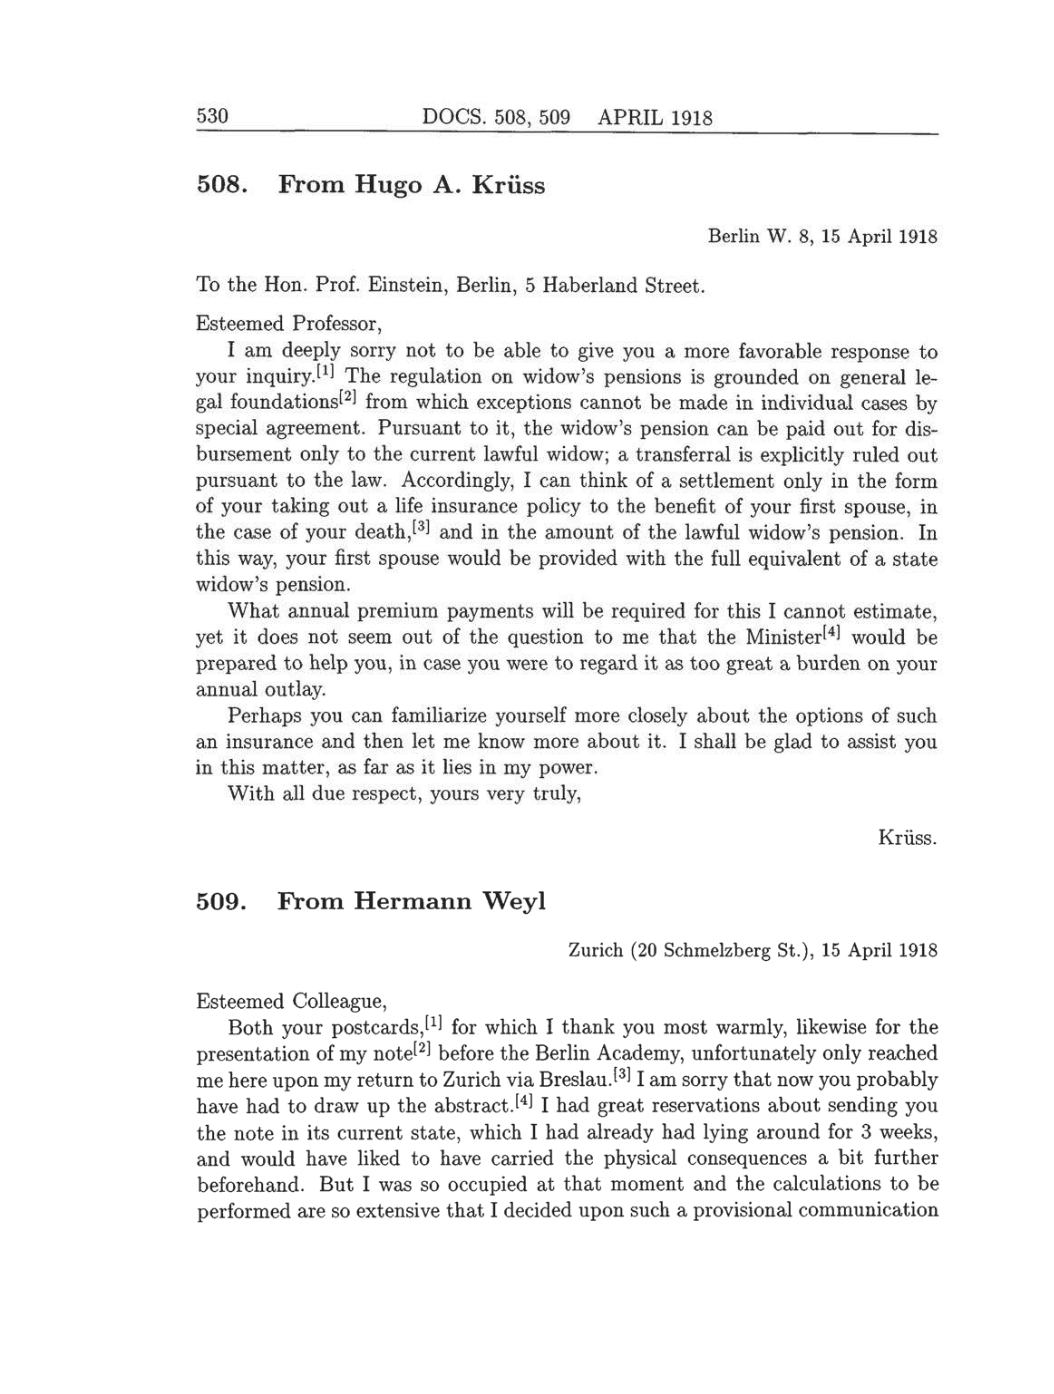 Volume 8: The Berlin Years: Correspondence, 1914-1918 (English translation supplement) page 530